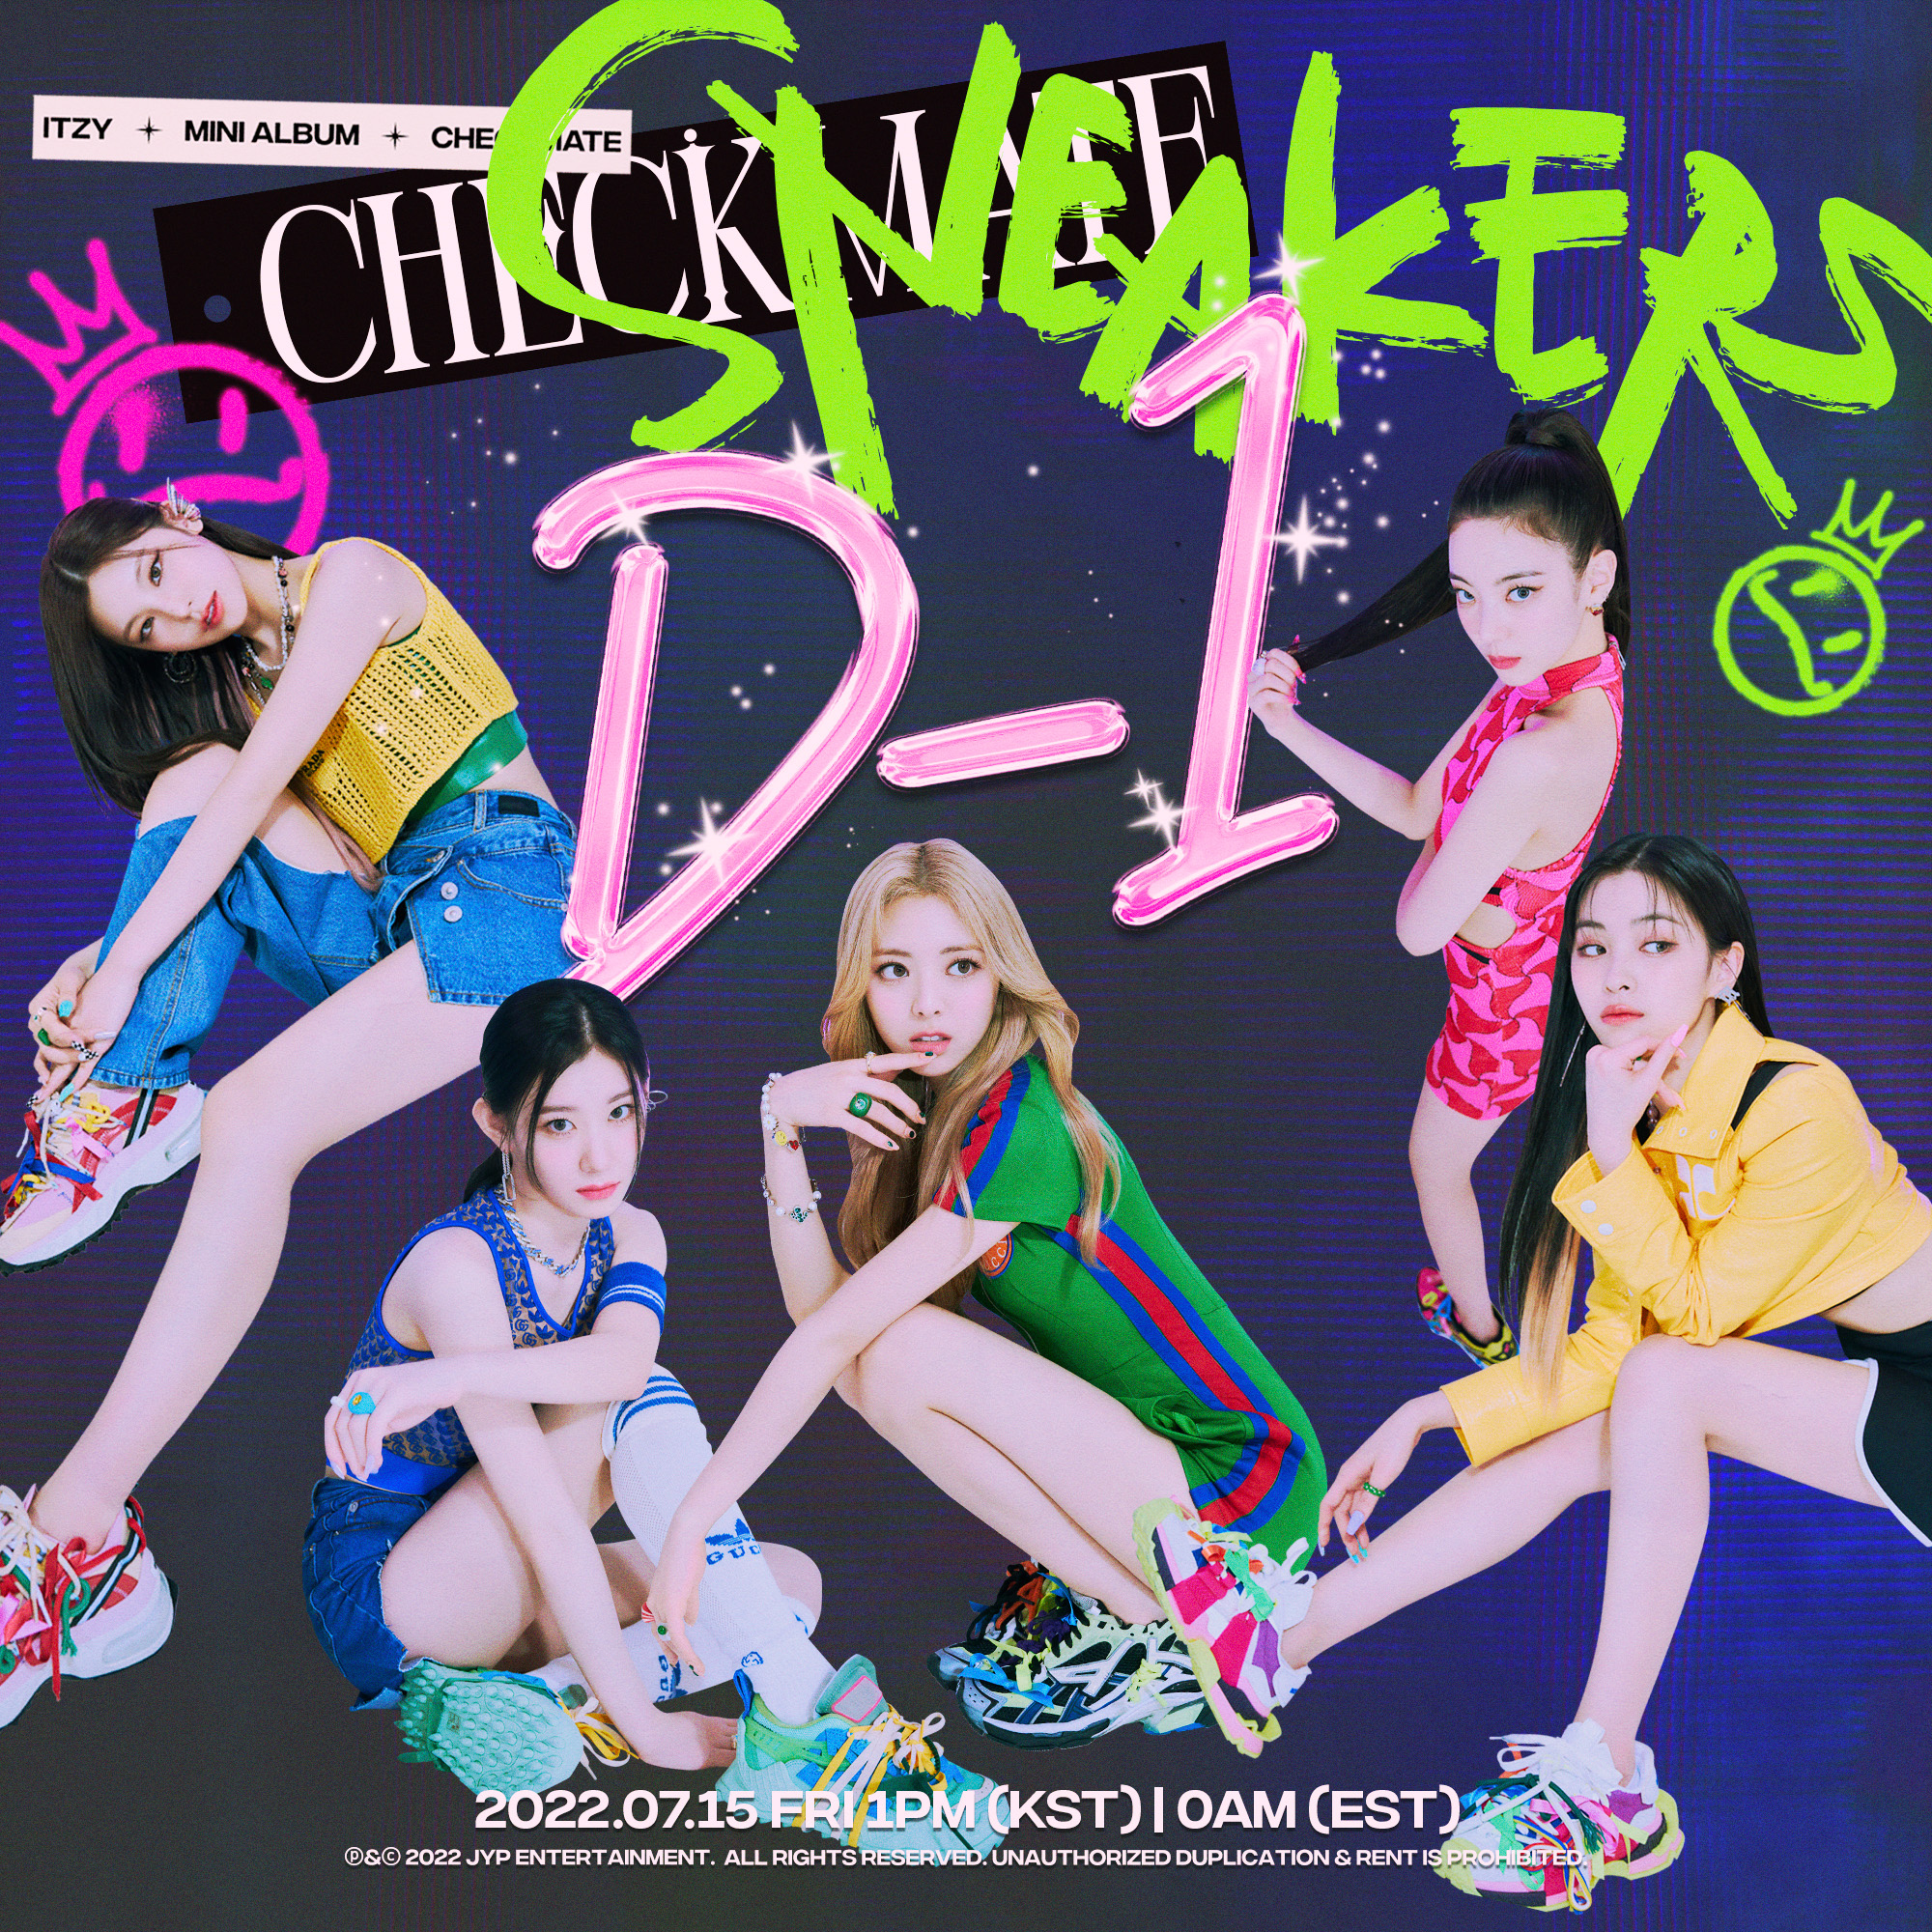 Idol_Multifan on X: has released a D-1 poster for their upcoming 5th mini-album “Checkmate” which features the title track “Sneakers” &amp; is scheduled to be released on July 15th. /